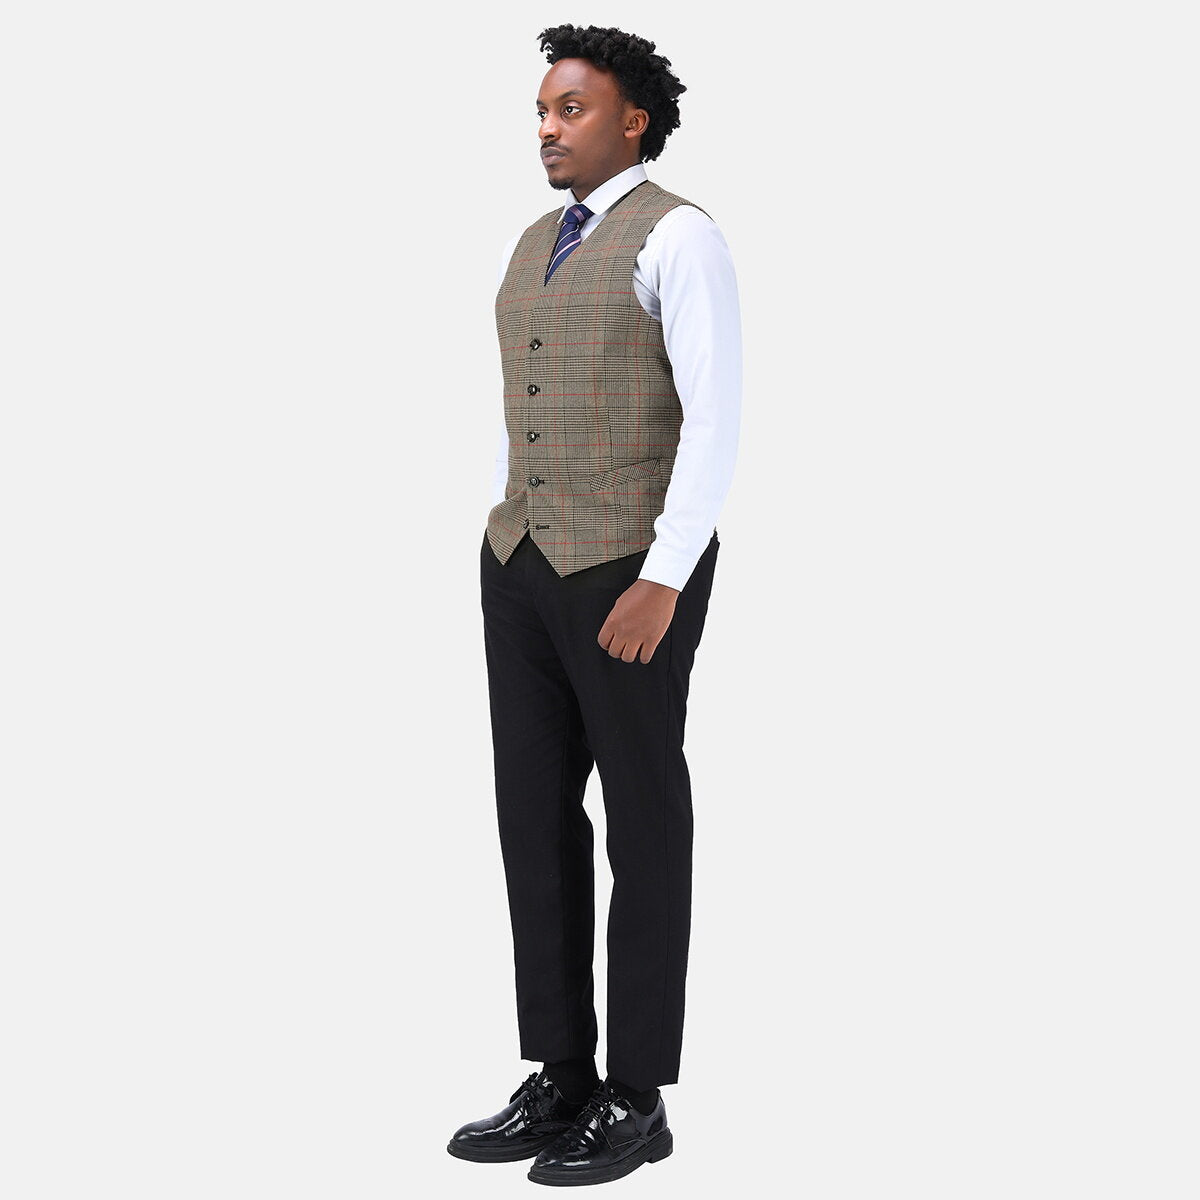 Checked Vests Stripes Business Slim Fit Cotton Grey